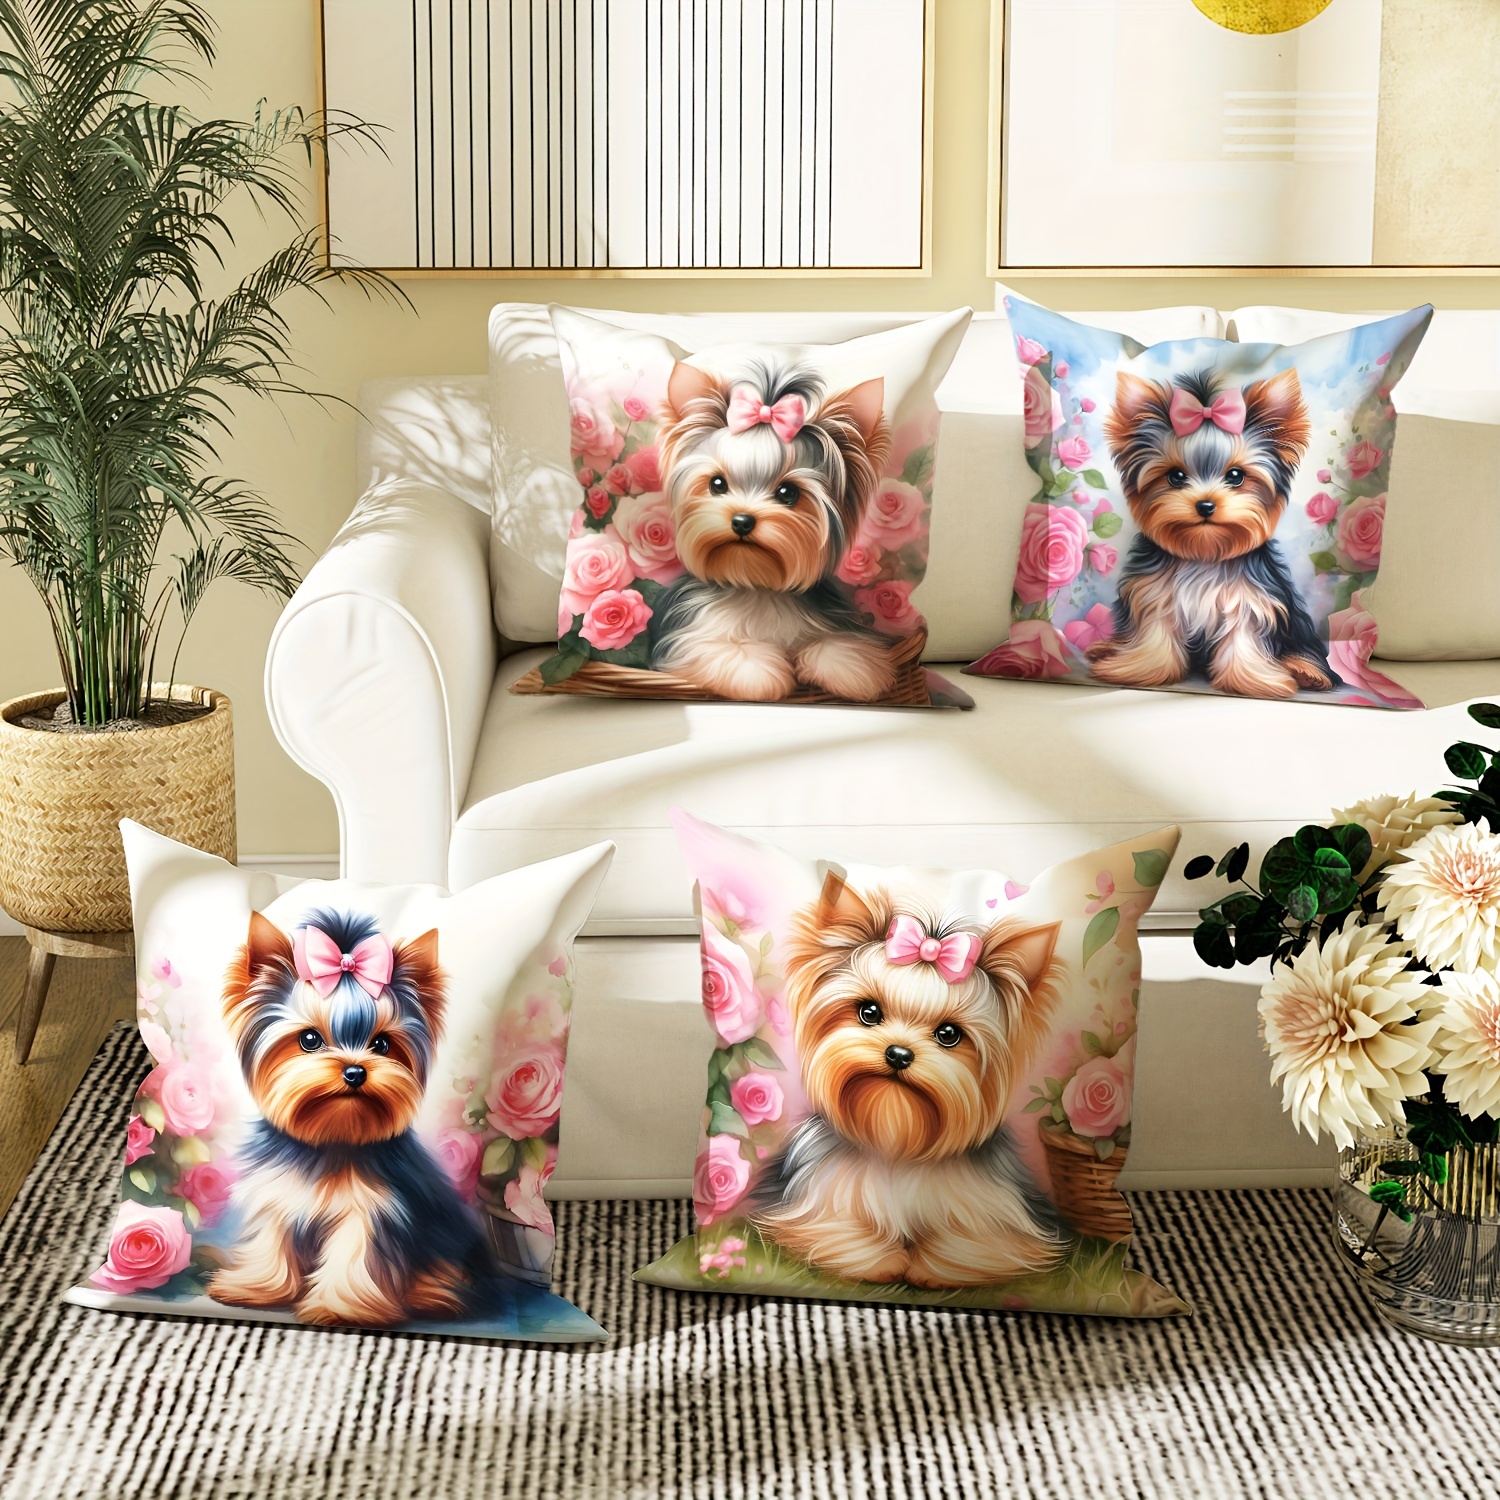 

4-pack Contemporary Velvet Throw Pillow Covers With Cute Dog Prints, Decorative Zippered Pillowcases For Sofa And Bedroom, Machine Washable Polyester, 18x18 Inches - Pink And Brown Dog Patterns